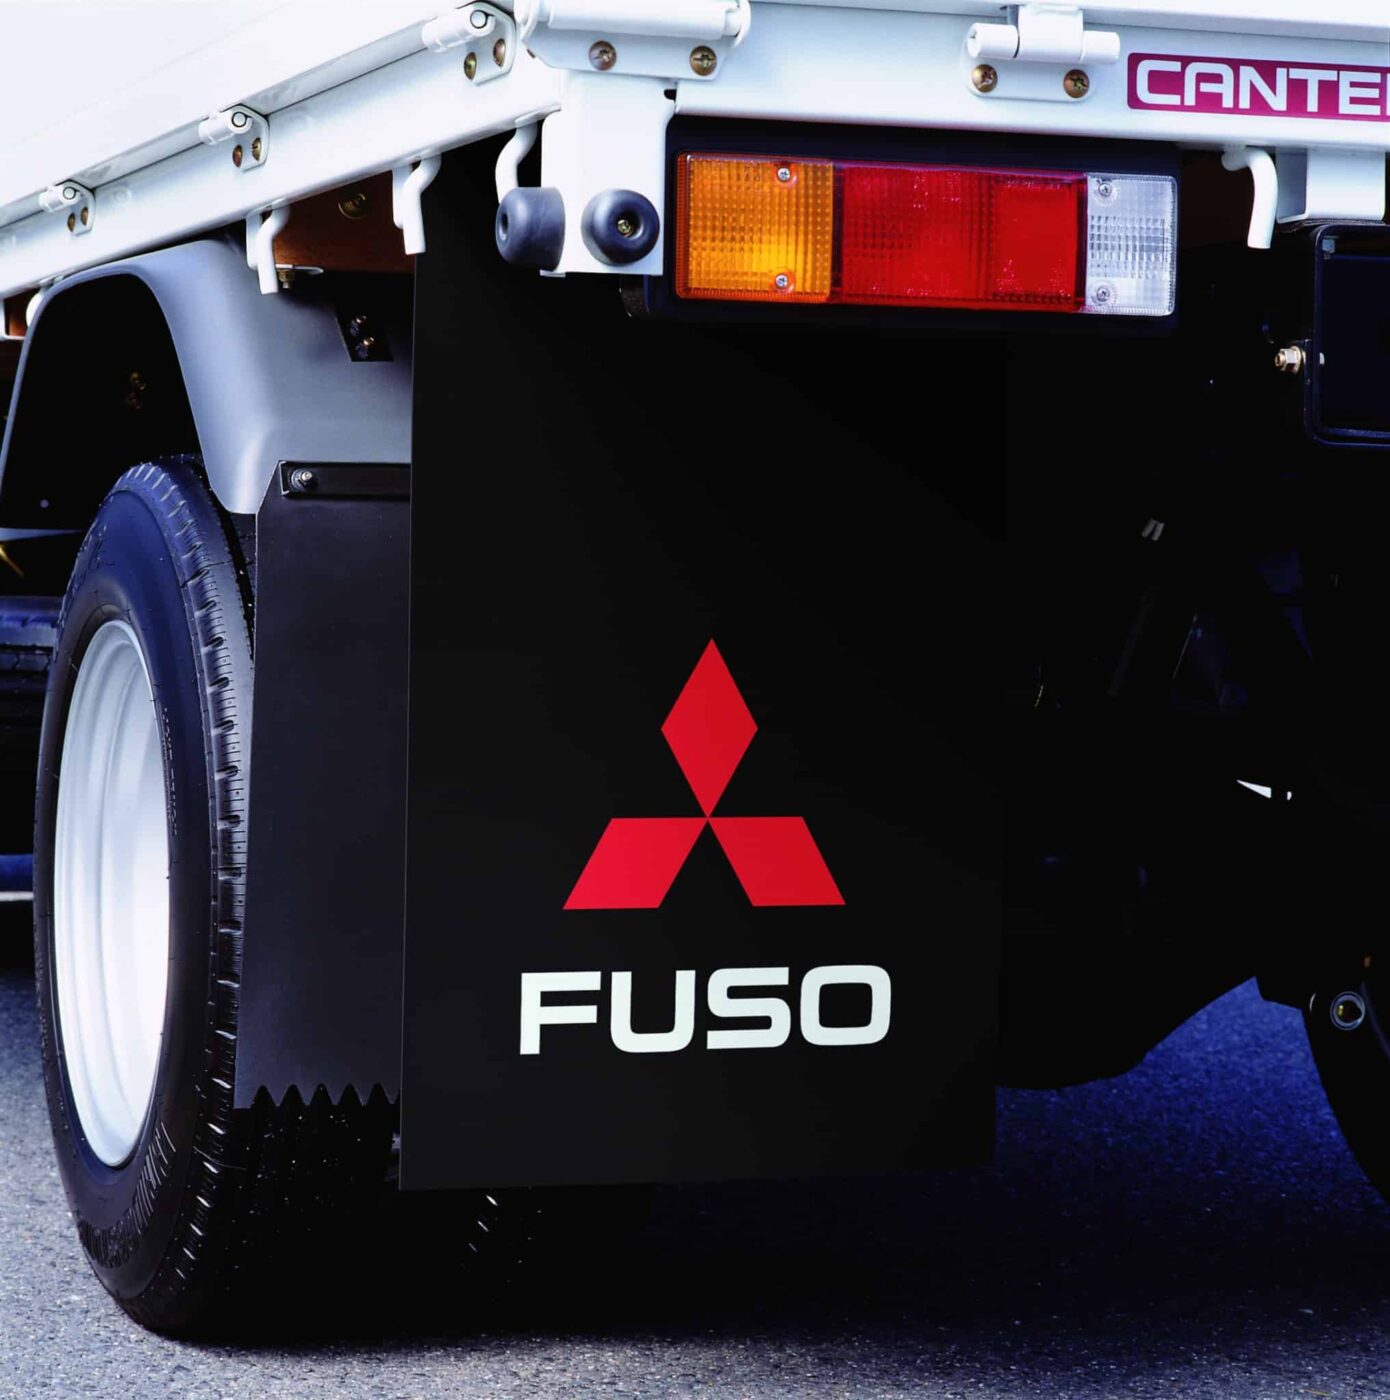 The FUSO Mud Guards protect the vehicle, passengers, other vehicles, and pedestrians from mud and other flying debris thrown into the air by the rotating tires.